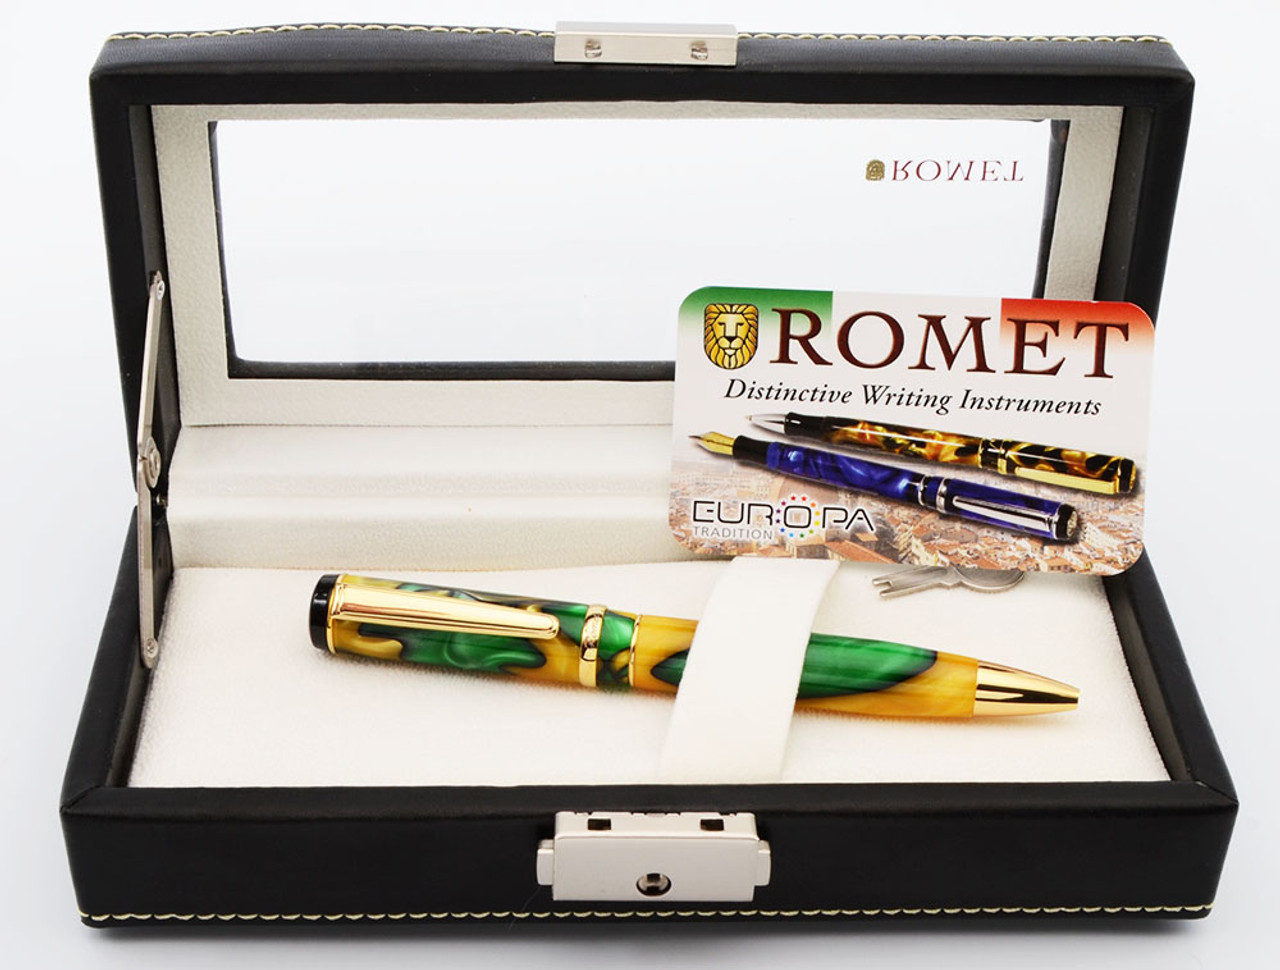 Romet Europa Ballpoint Pen - Green & Gold Acrylic (Excellent in Box, Works Well)